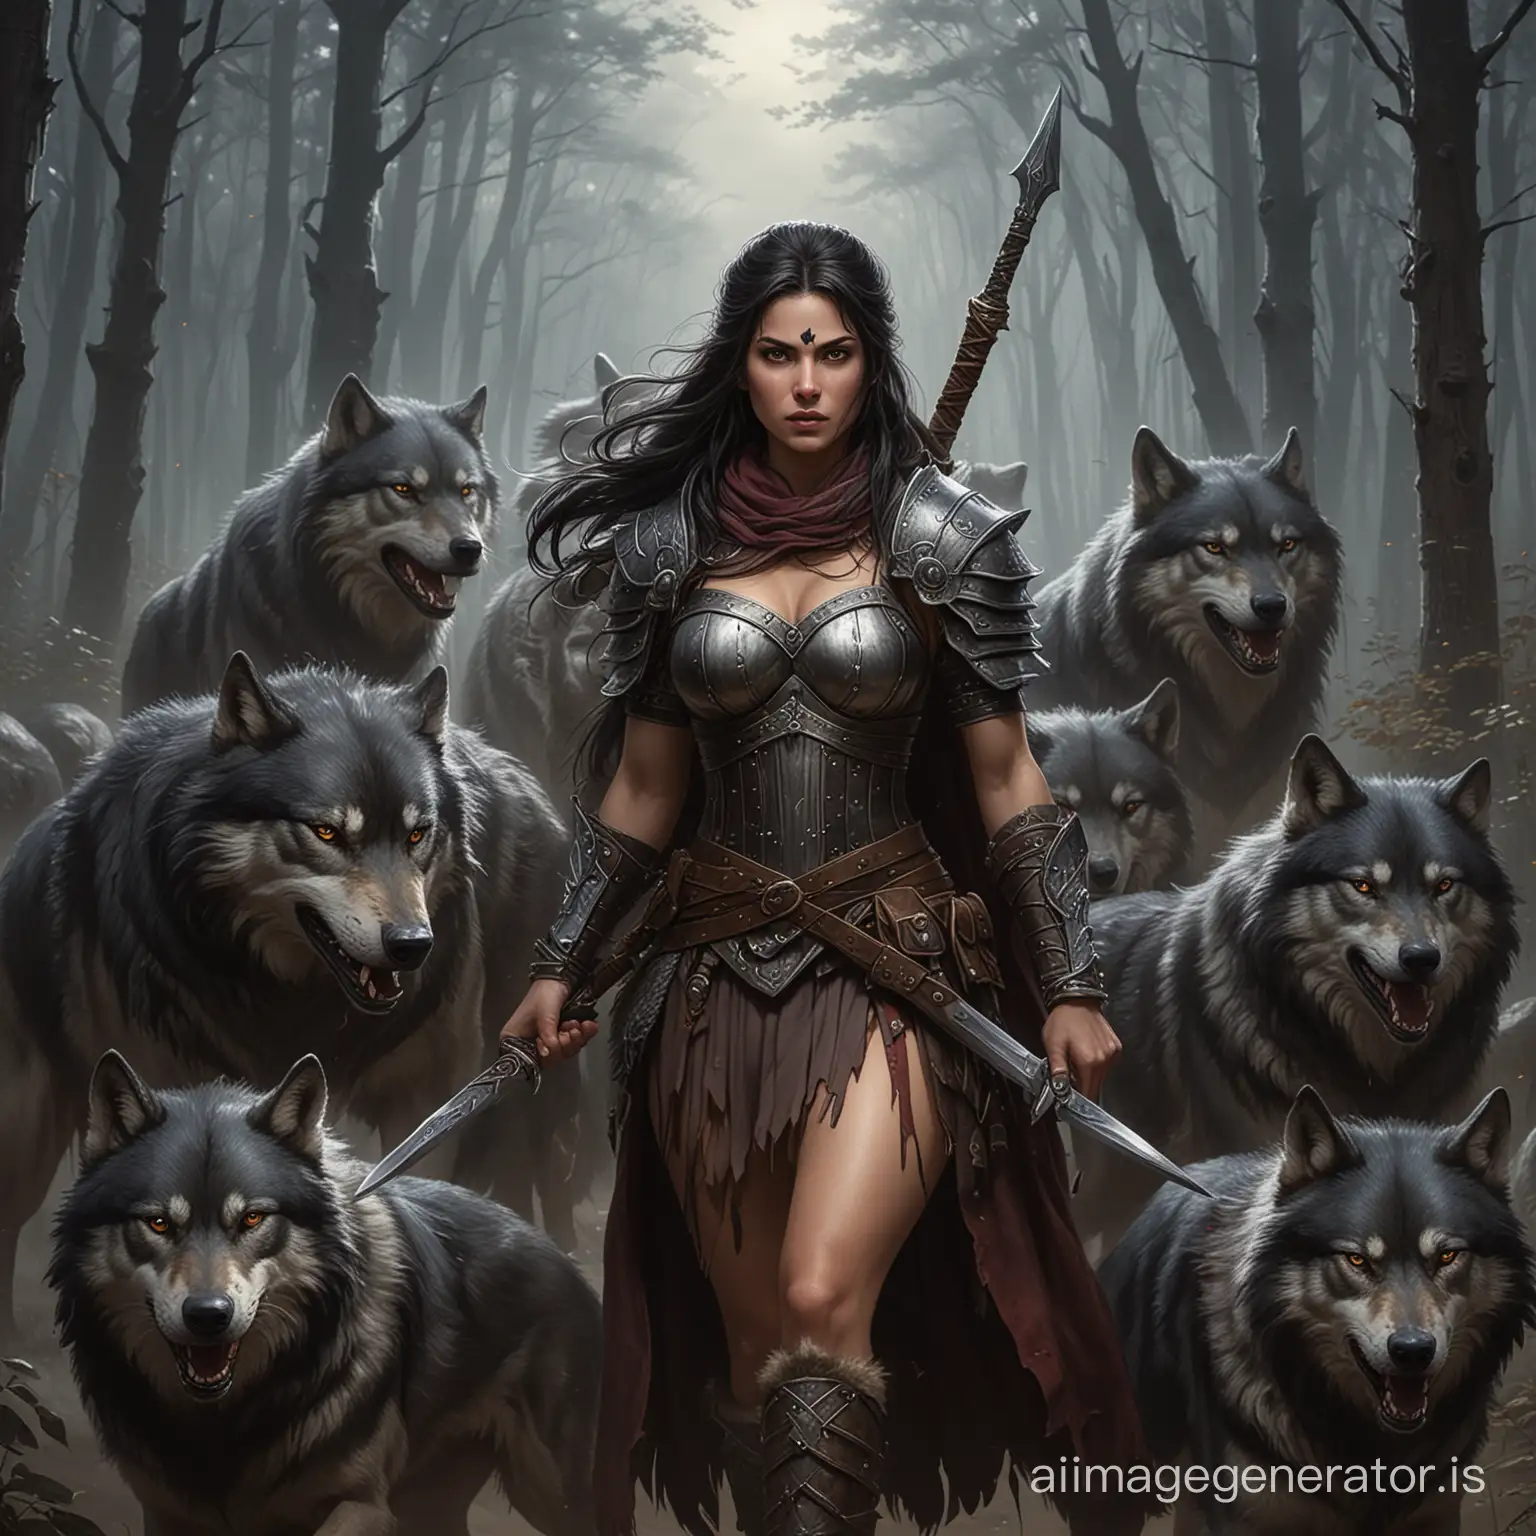 DarkHaired-Wolfmaiden-Warrior-Protecting-Her-Pack